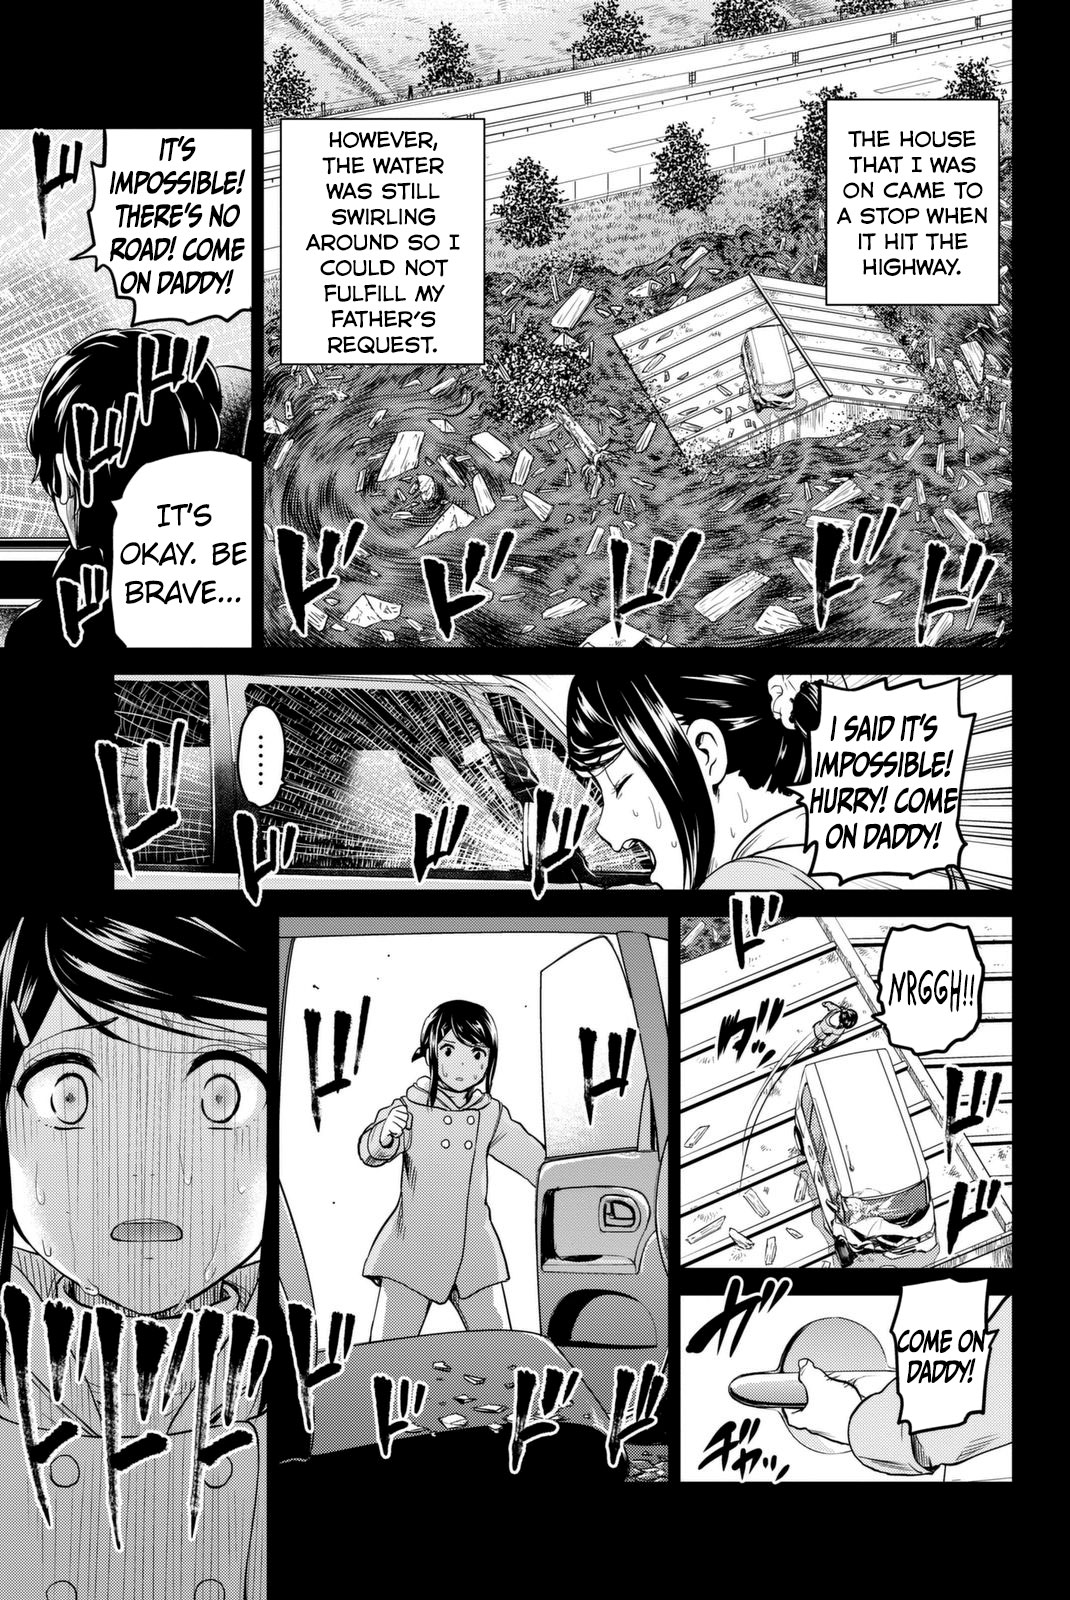 INFECTION Vol. 7 Ch. 54 The beginning of love